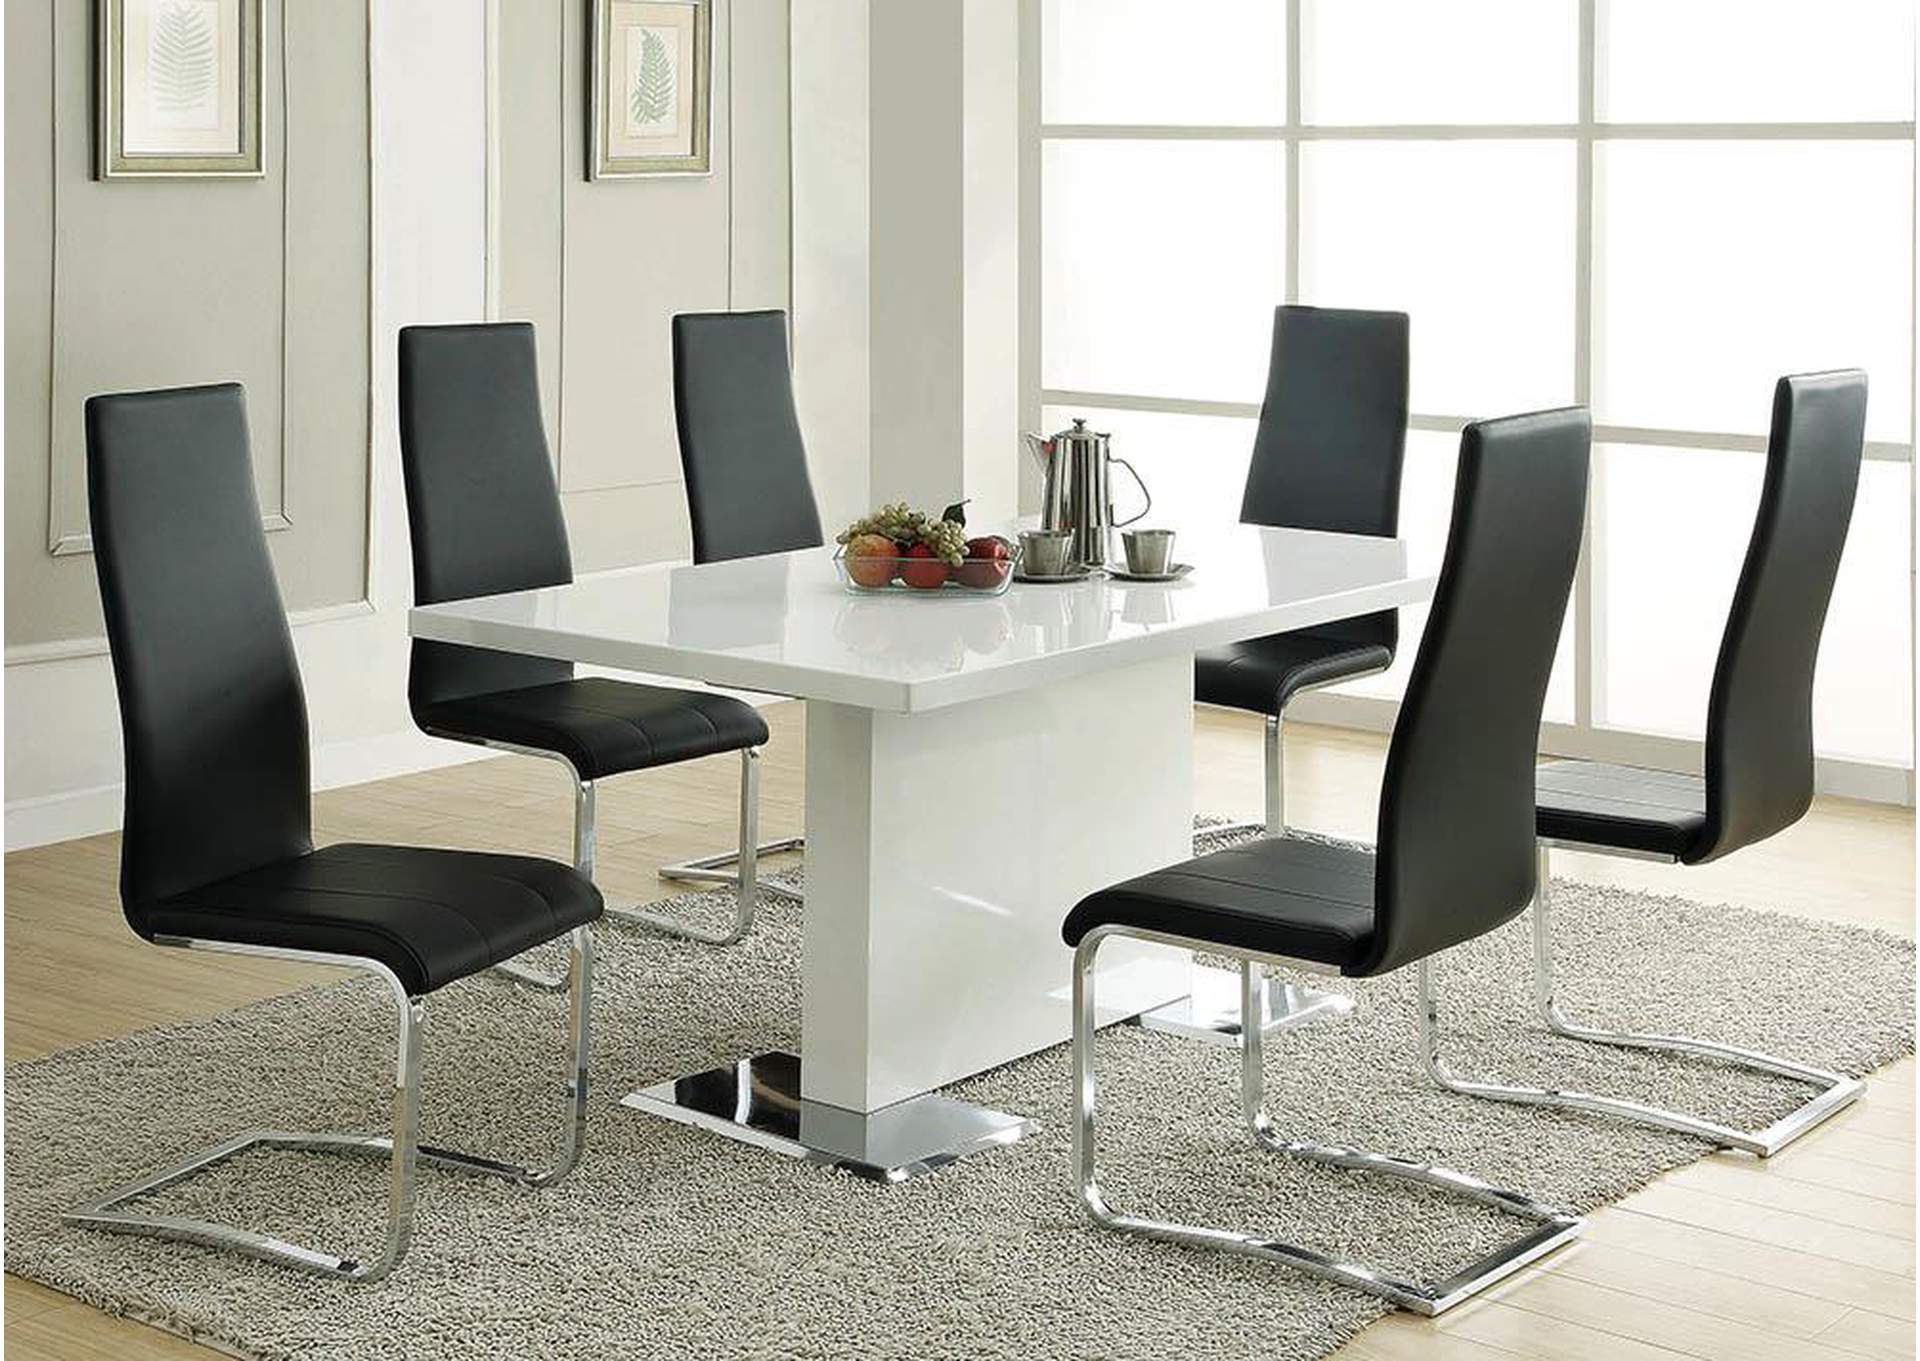 Anges High Back Dining Chairs Black And Chrome (Set of 4),Coaster Furniture